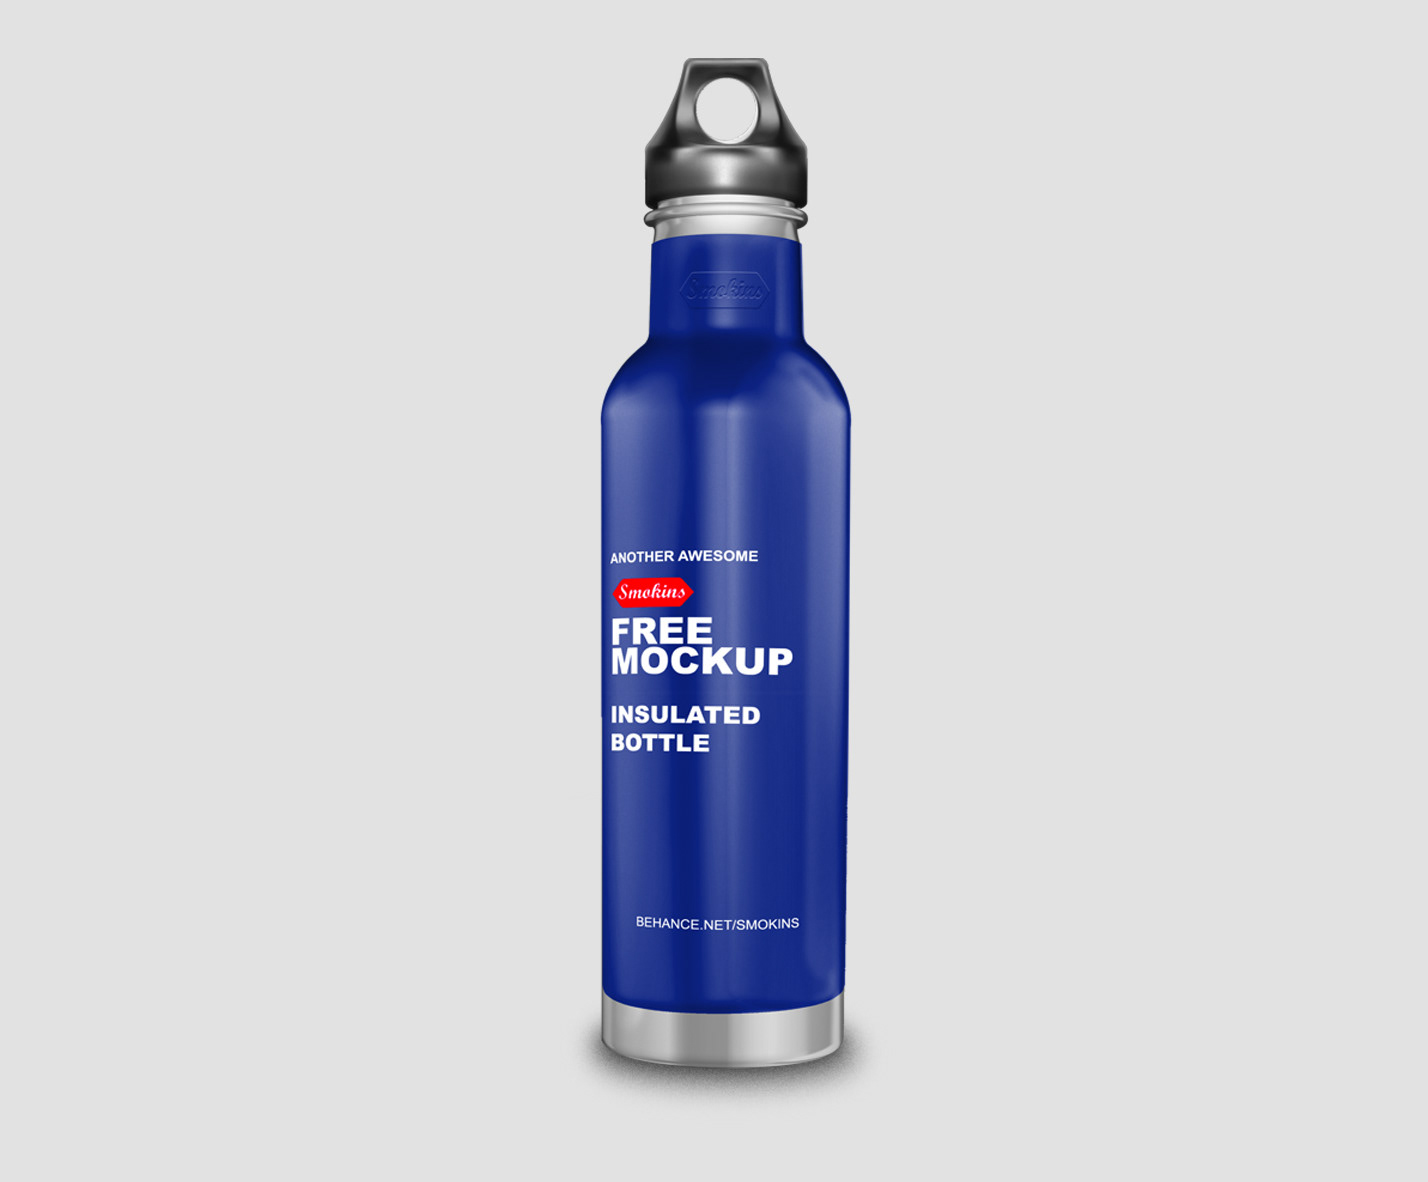 Download Insulated Bottle Mockup Projects Photos Videos Logos Illustrations And Branding On Behance Yellowimages Mockups